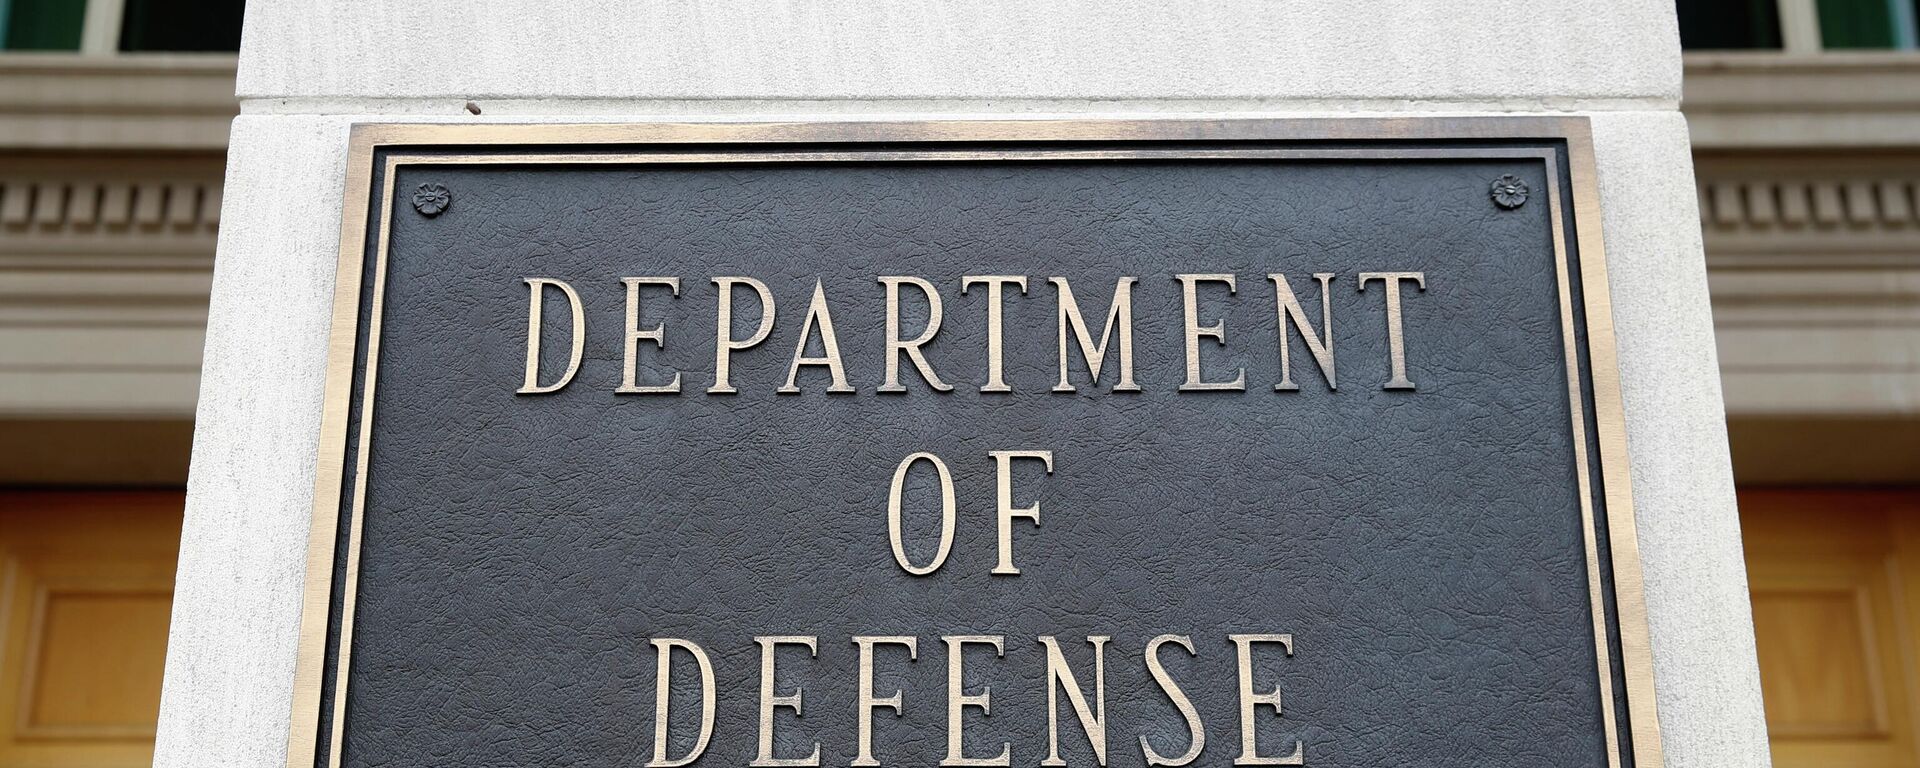 This April 19, 2019 file photo shows a sign for the Department of Defense at the Pentagon in Washington.  - Sputnik International, 1920, 20.02.2023